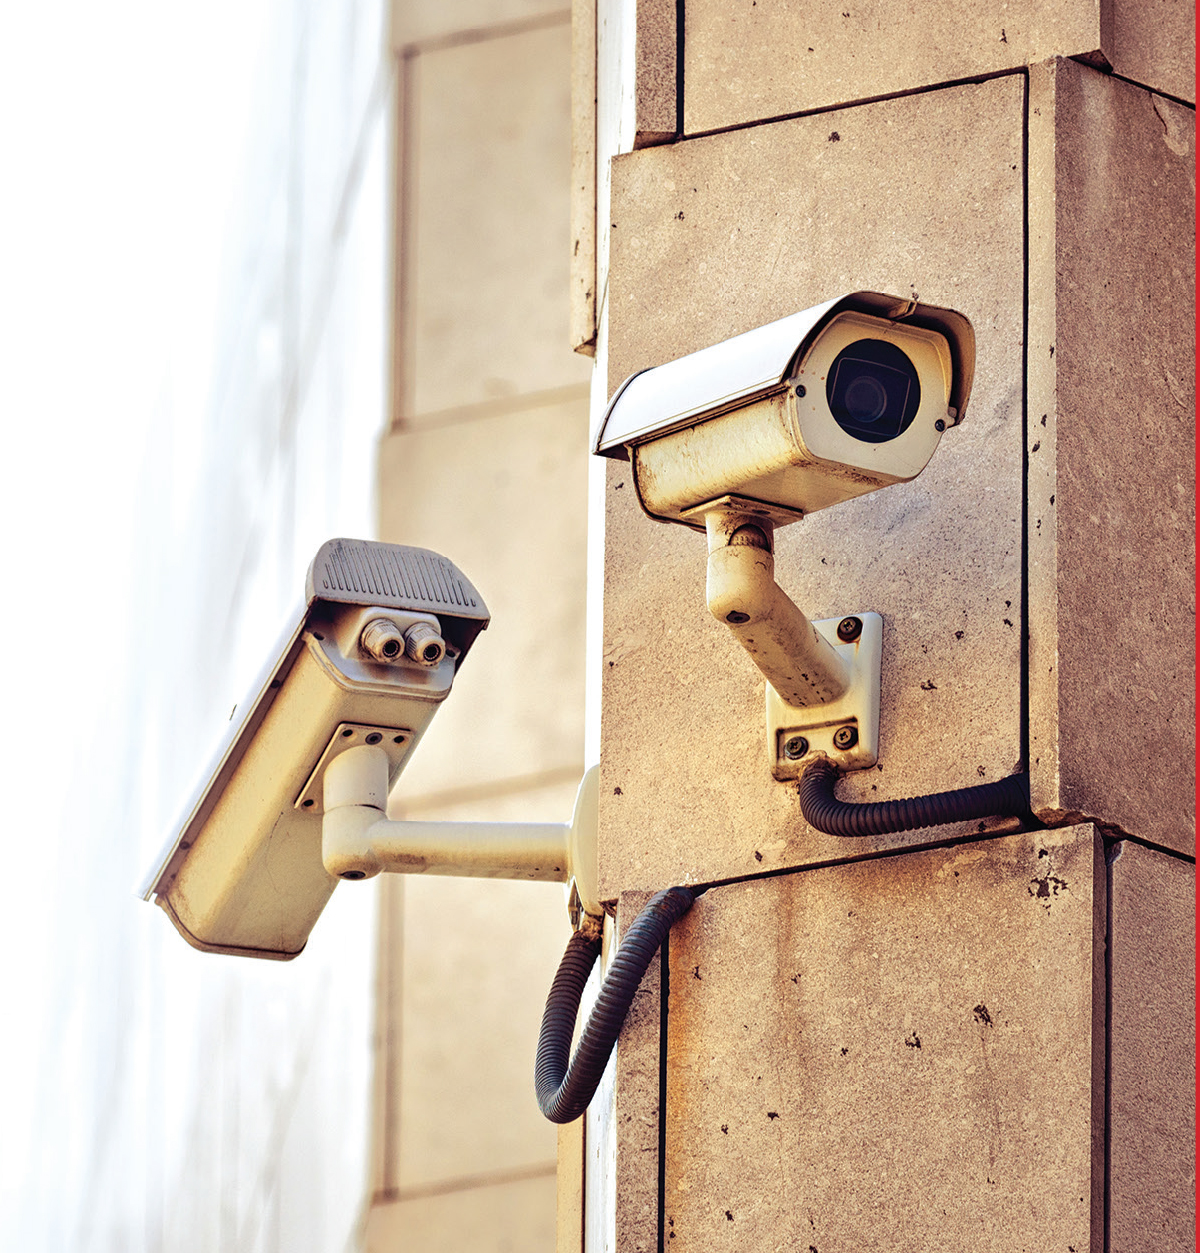 Reducing Downtime for the Surveillance System